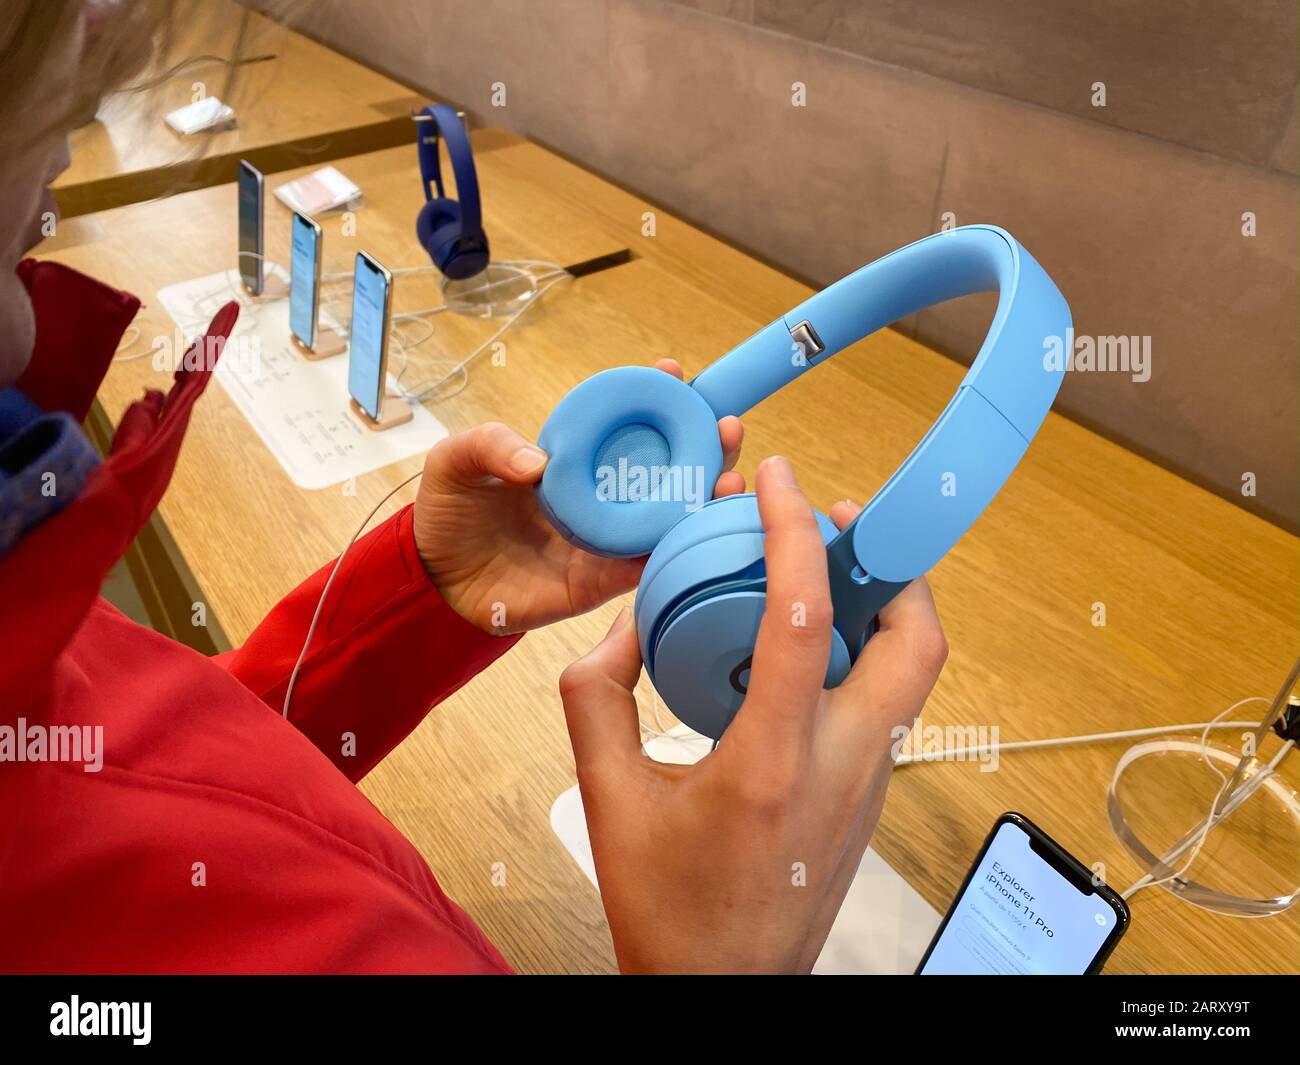 Paris, France - Nov 02, 2019: Woman in red coat inside Apple Computers Store testing admiring the new latest Beats by Dr Dre Solo Pro Active Noise Cancelling headphones Stock Photo